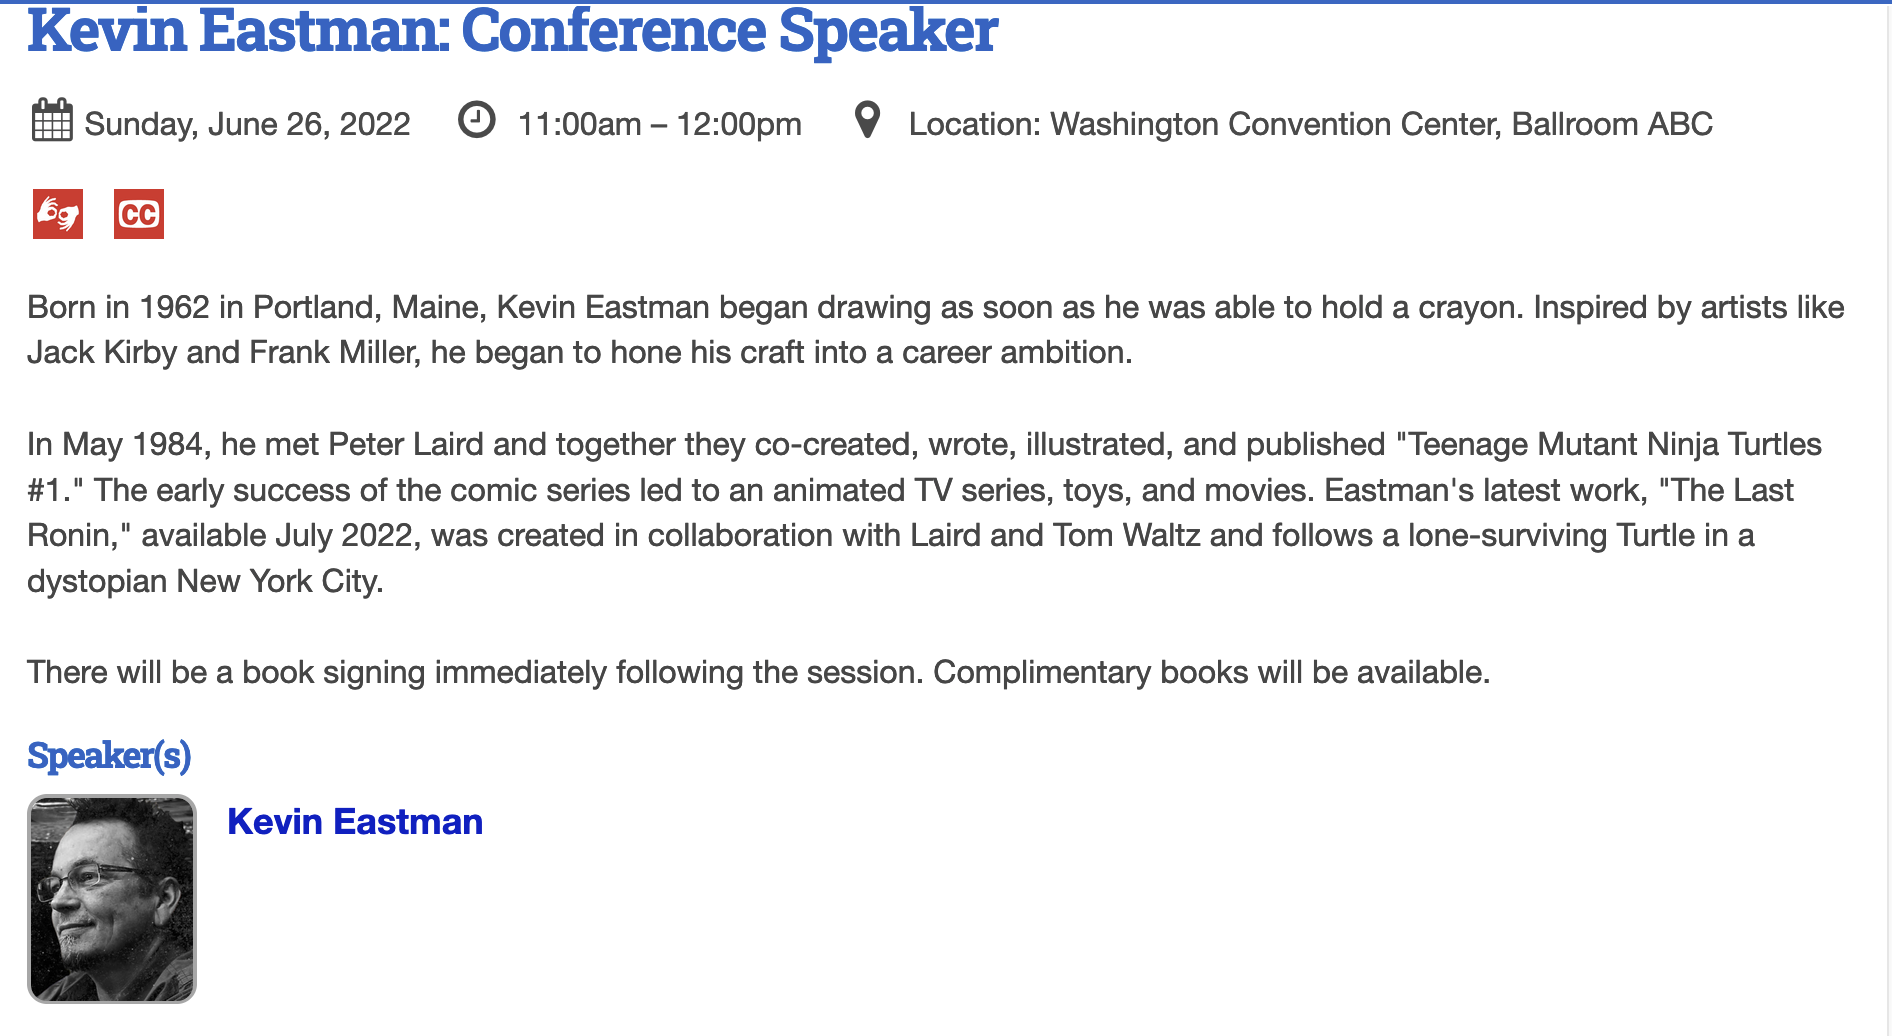 I'll be speaking at the American Library Association Annual Conference this Sunday